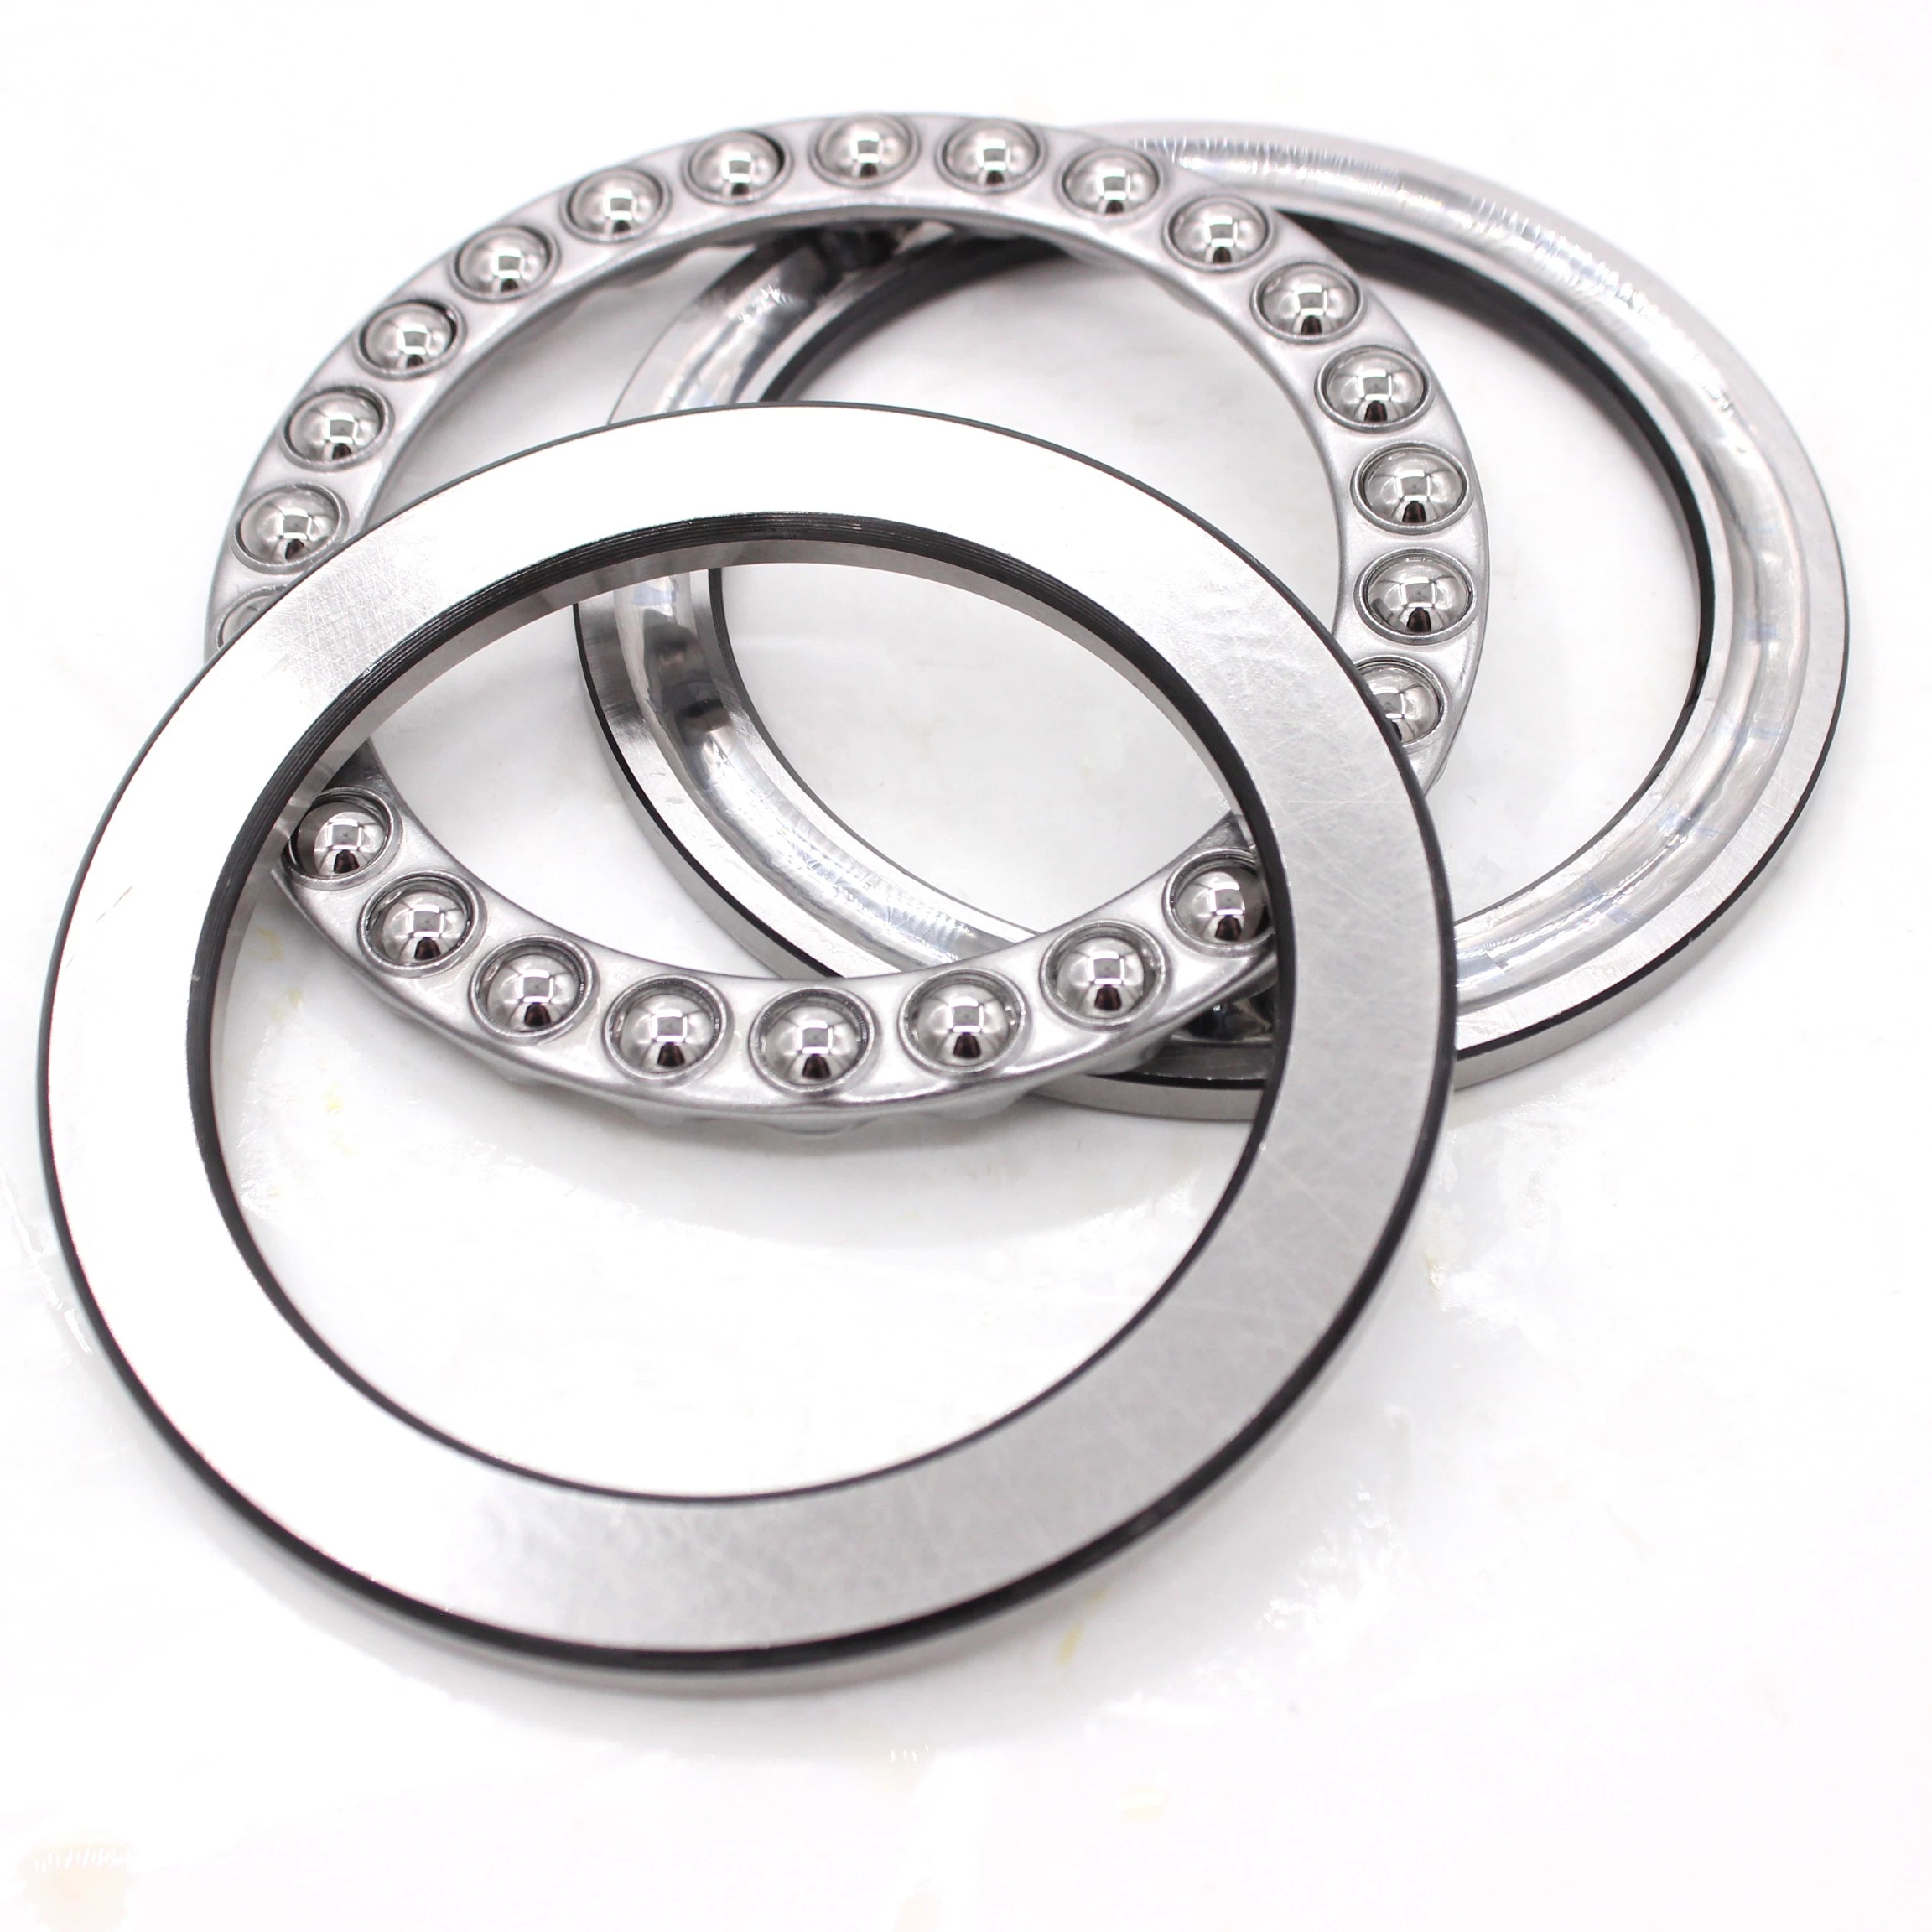 Original thrust ball bearing 51306 with high quality wholesale made in Japan rod ends bearing